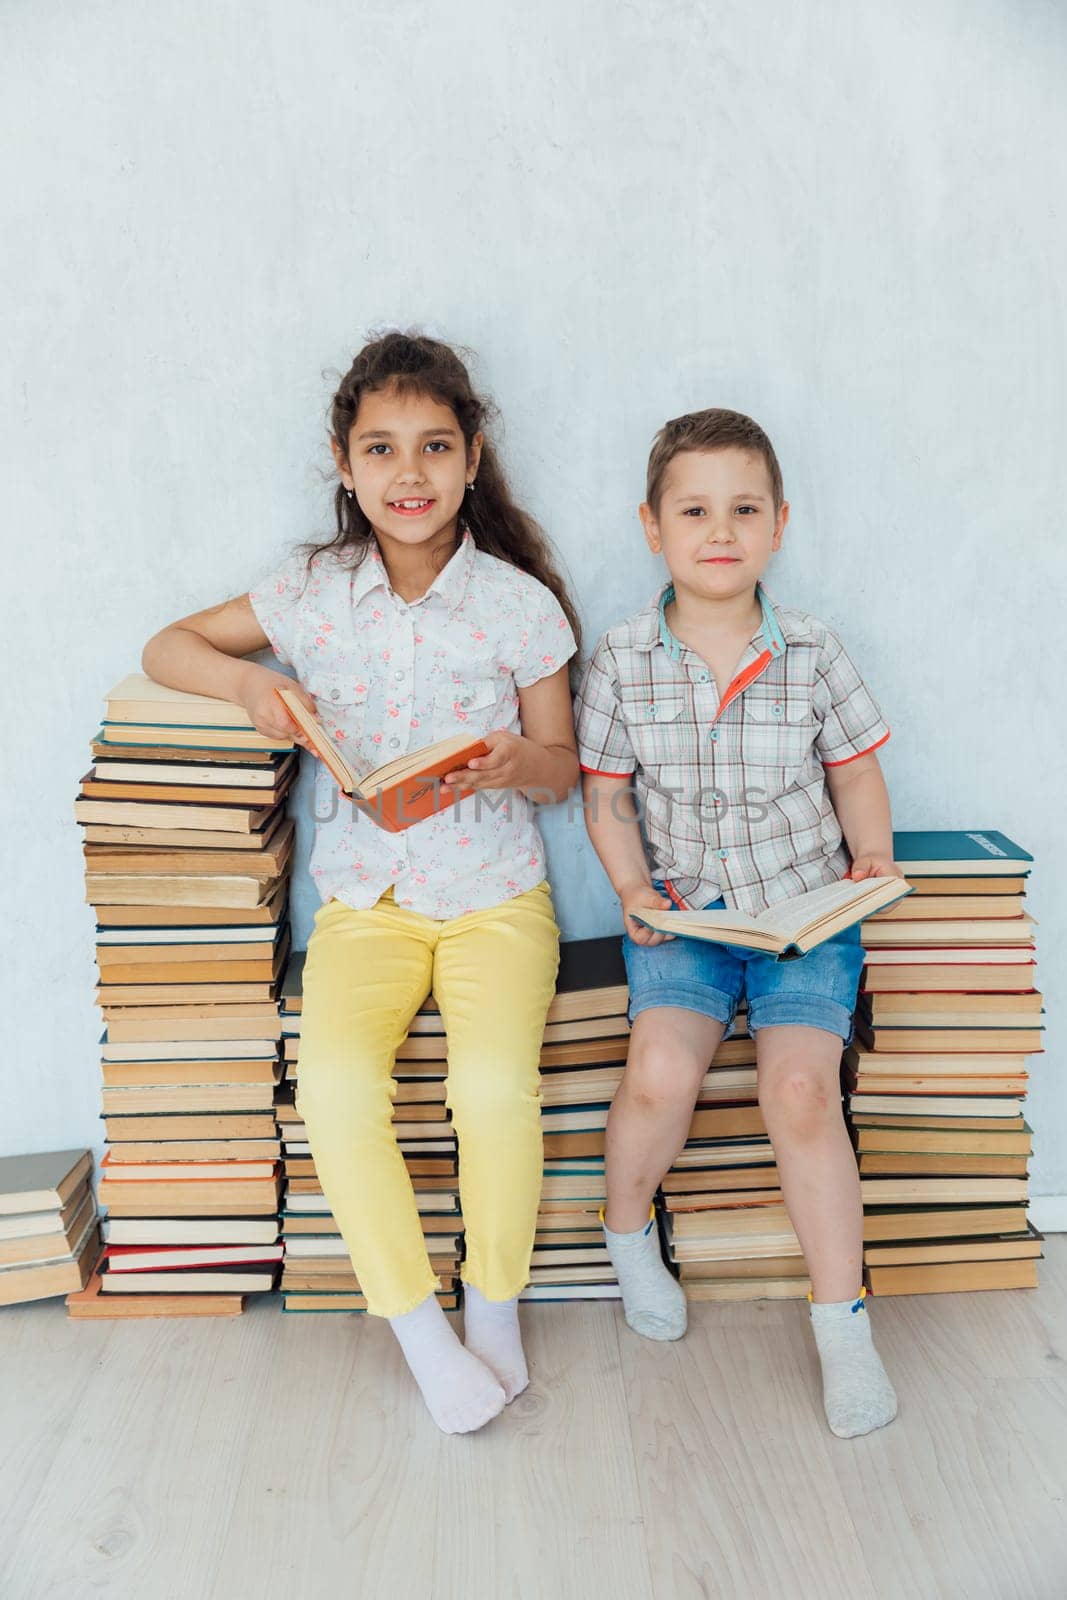 Little boy and girl sitting on stacks of educational books by Simakov